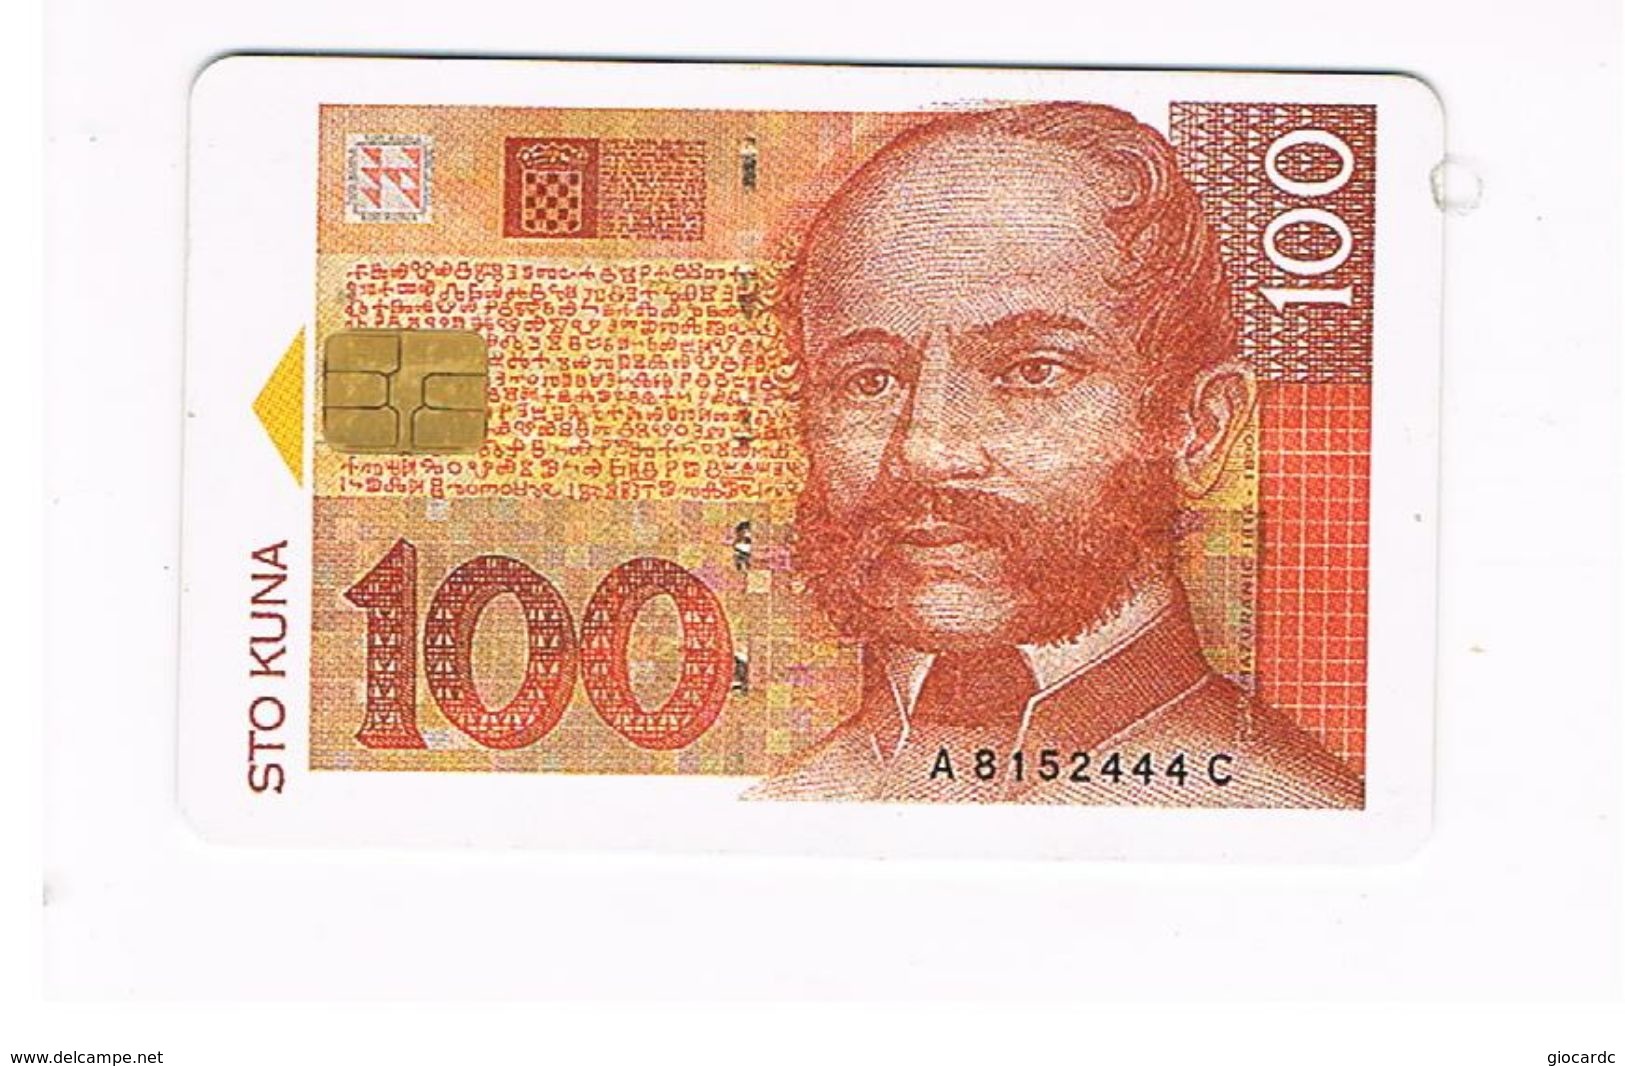 CROAZIA (CROATIA) - CHIP  HPT - BANKNOTE 100  - USED  -     RIF.26 - Timbres & Monnaies